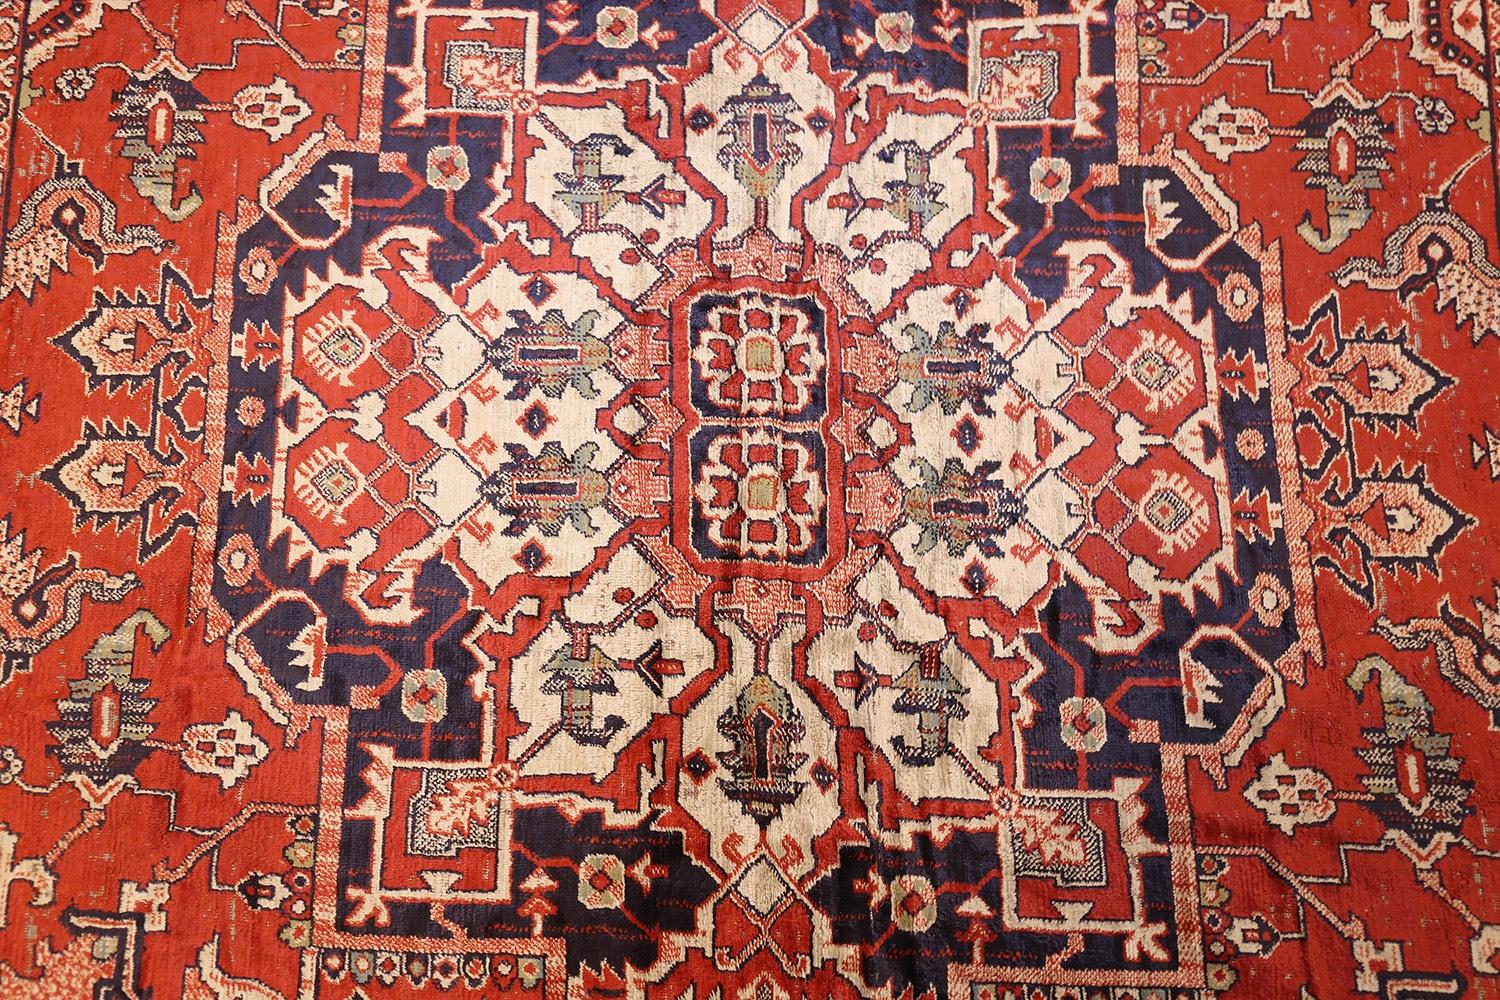 Antique American Chenille Rug. Size: 4 ft 7 in x 6 ft (1.4 m x 1.83 m) 3